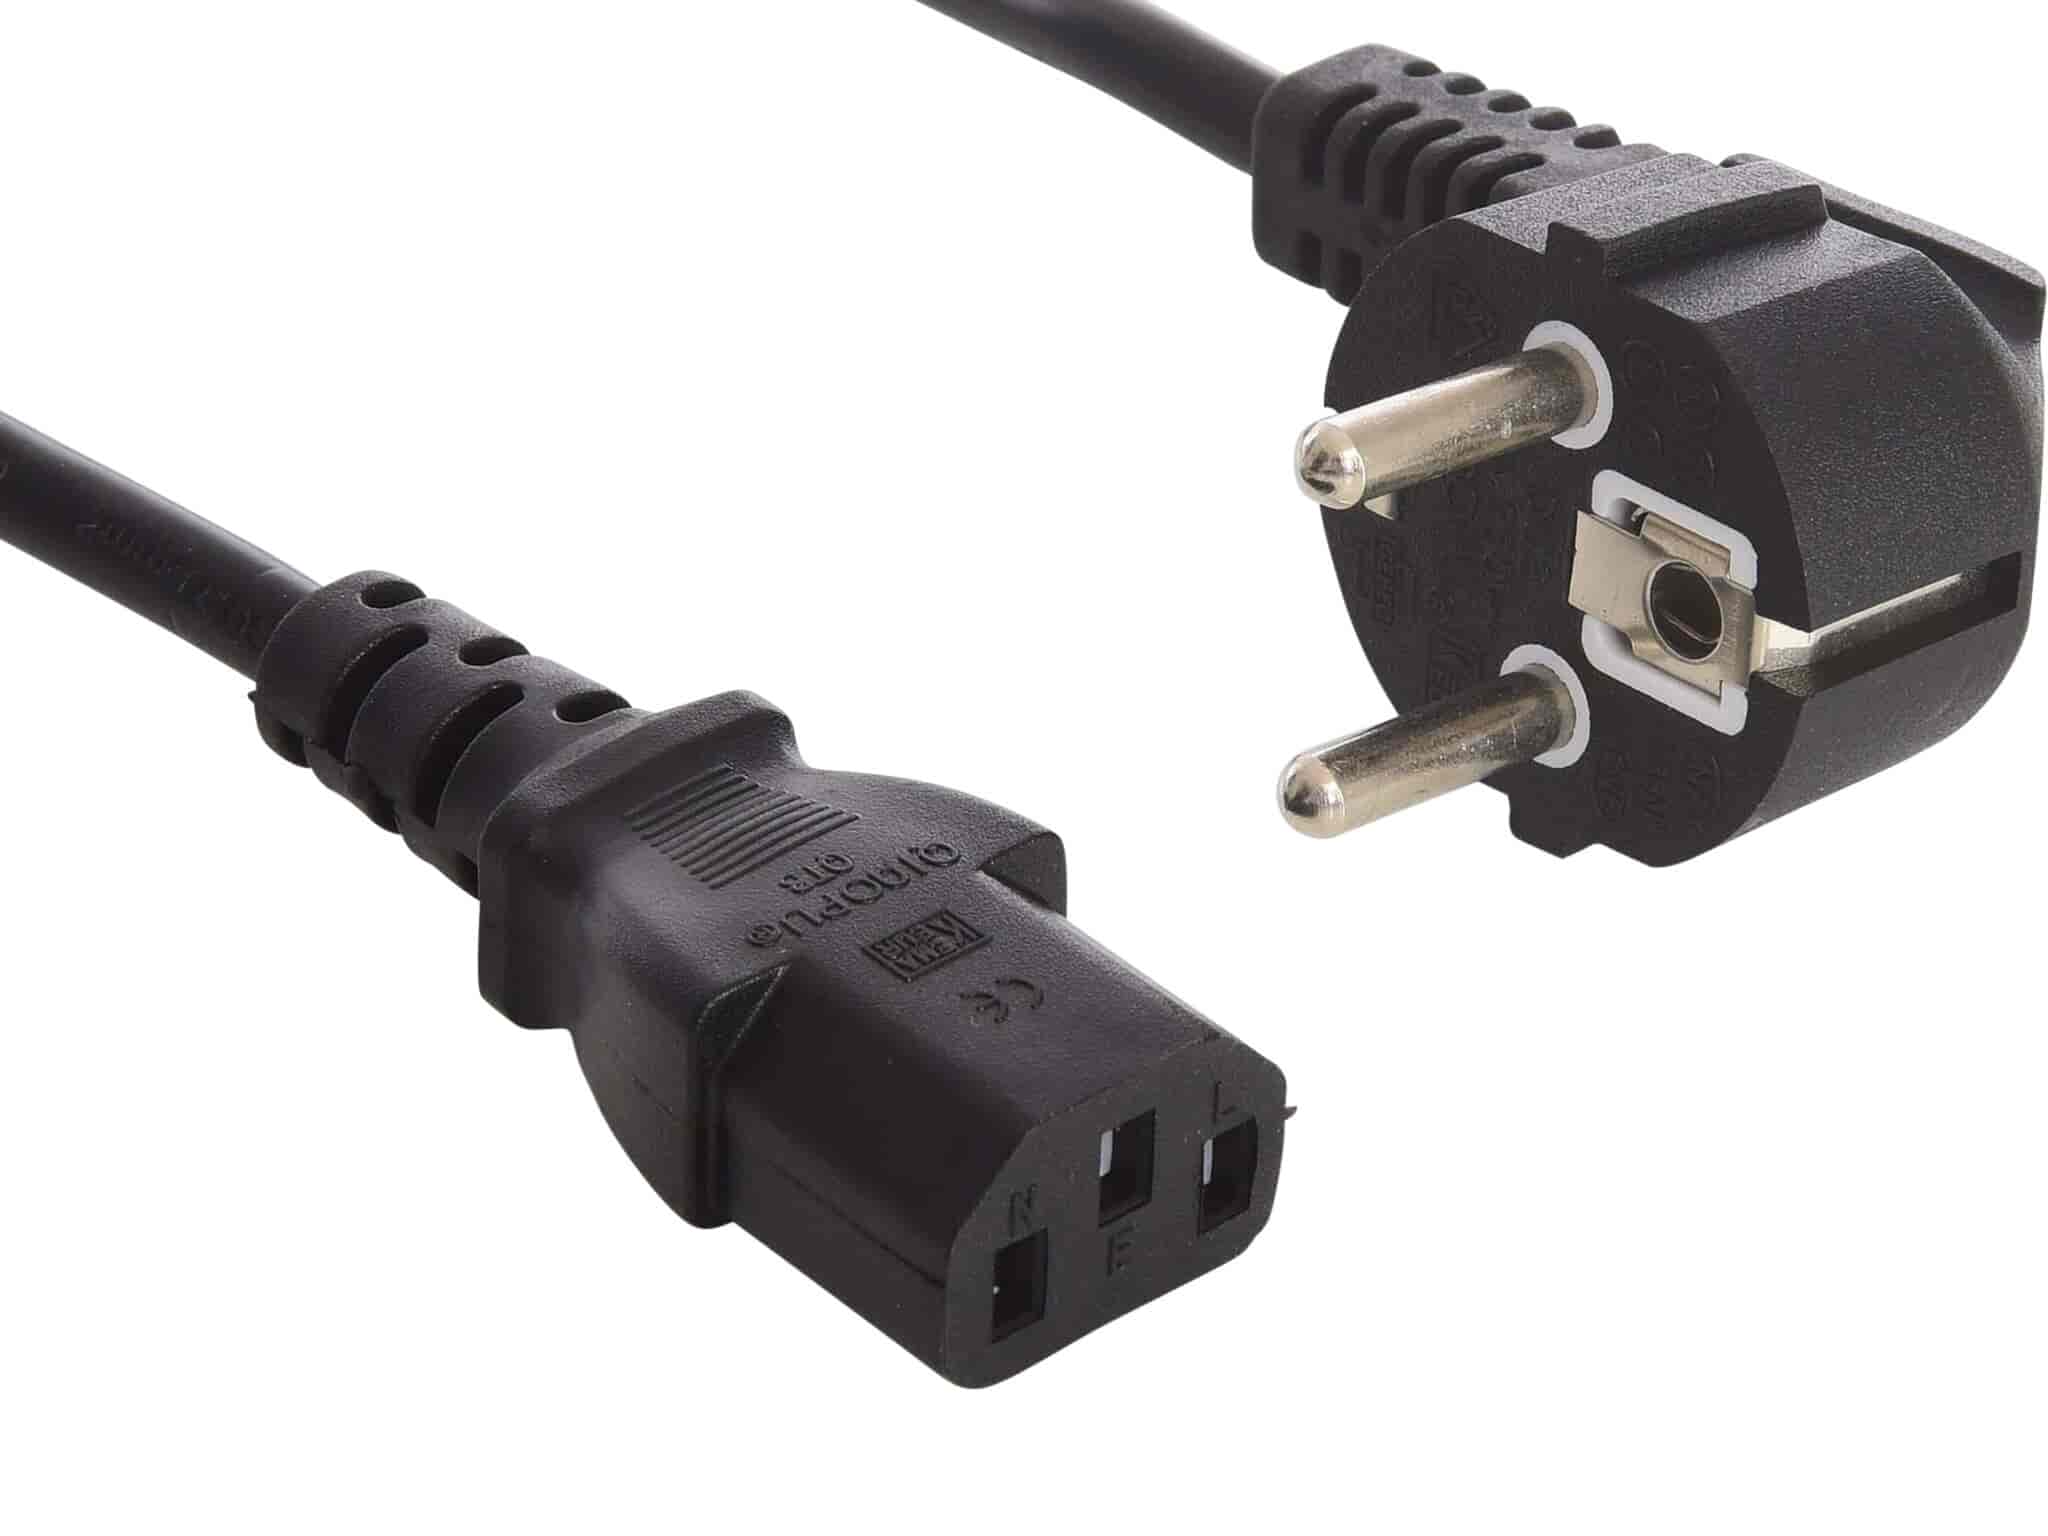 Sandberg 230V Cable GSTUV PC-Wall 1.8 mStandard computer power cable for connecting your computer to a mains socket or extension cable. With 2-pin plug.Sandberg